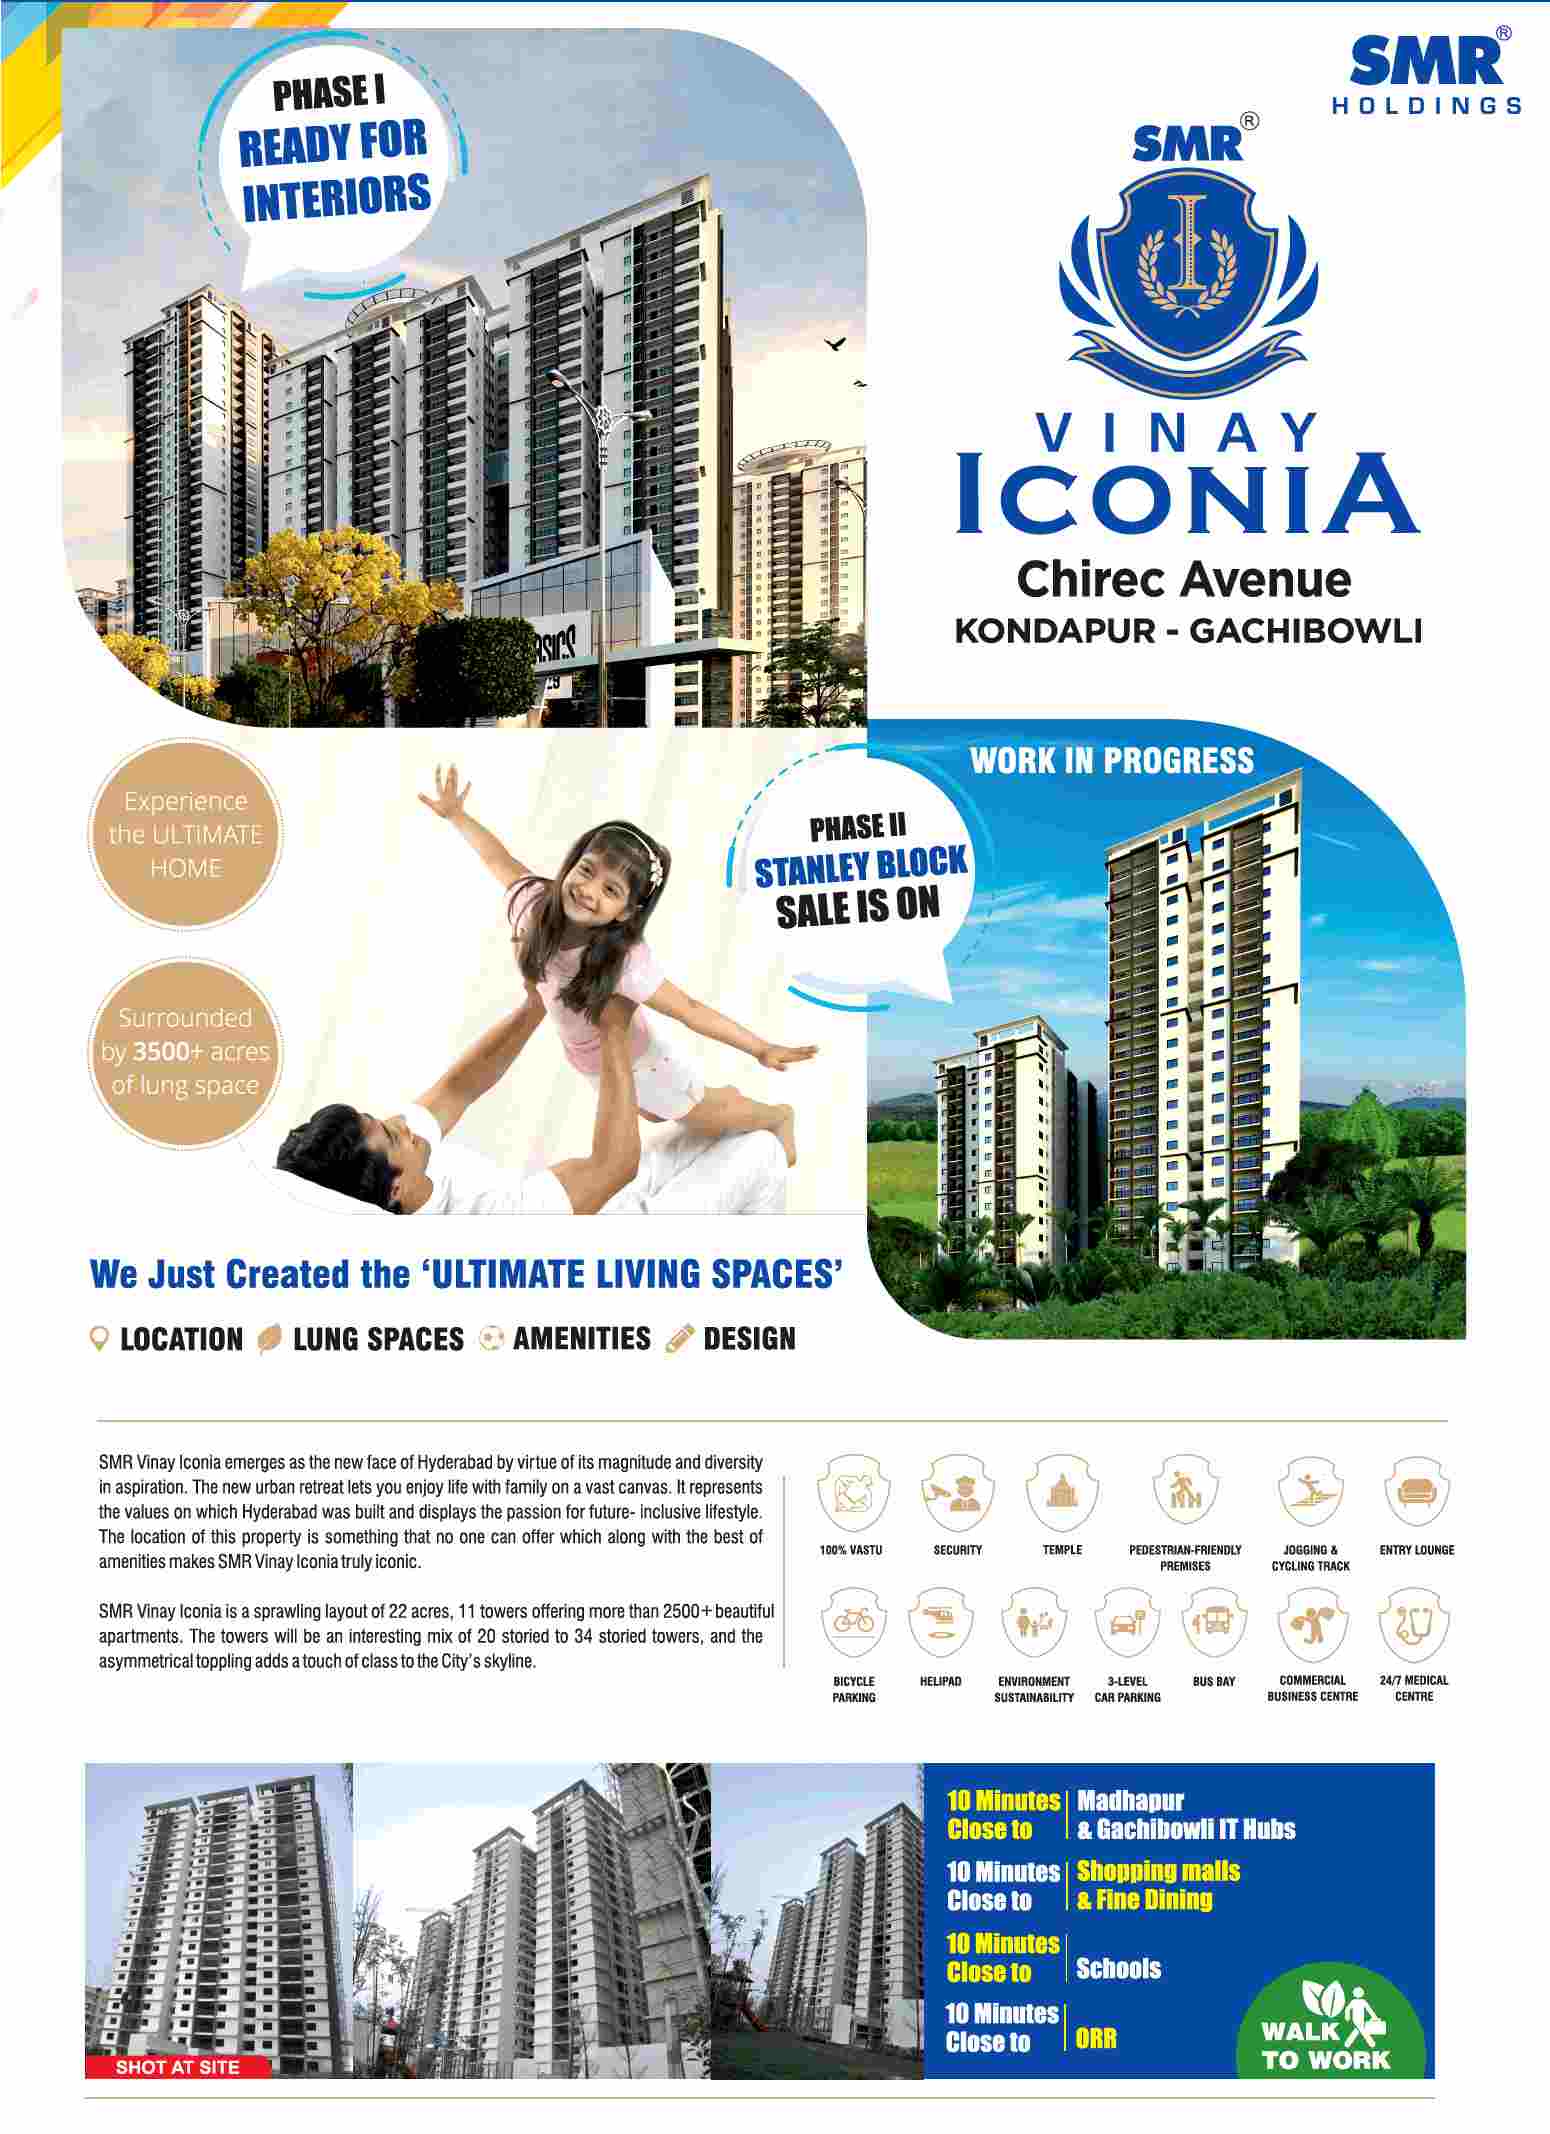 Enjoy life with family on a vast canvas by residing at SMR Vinay Iconia in Hyderabad Update